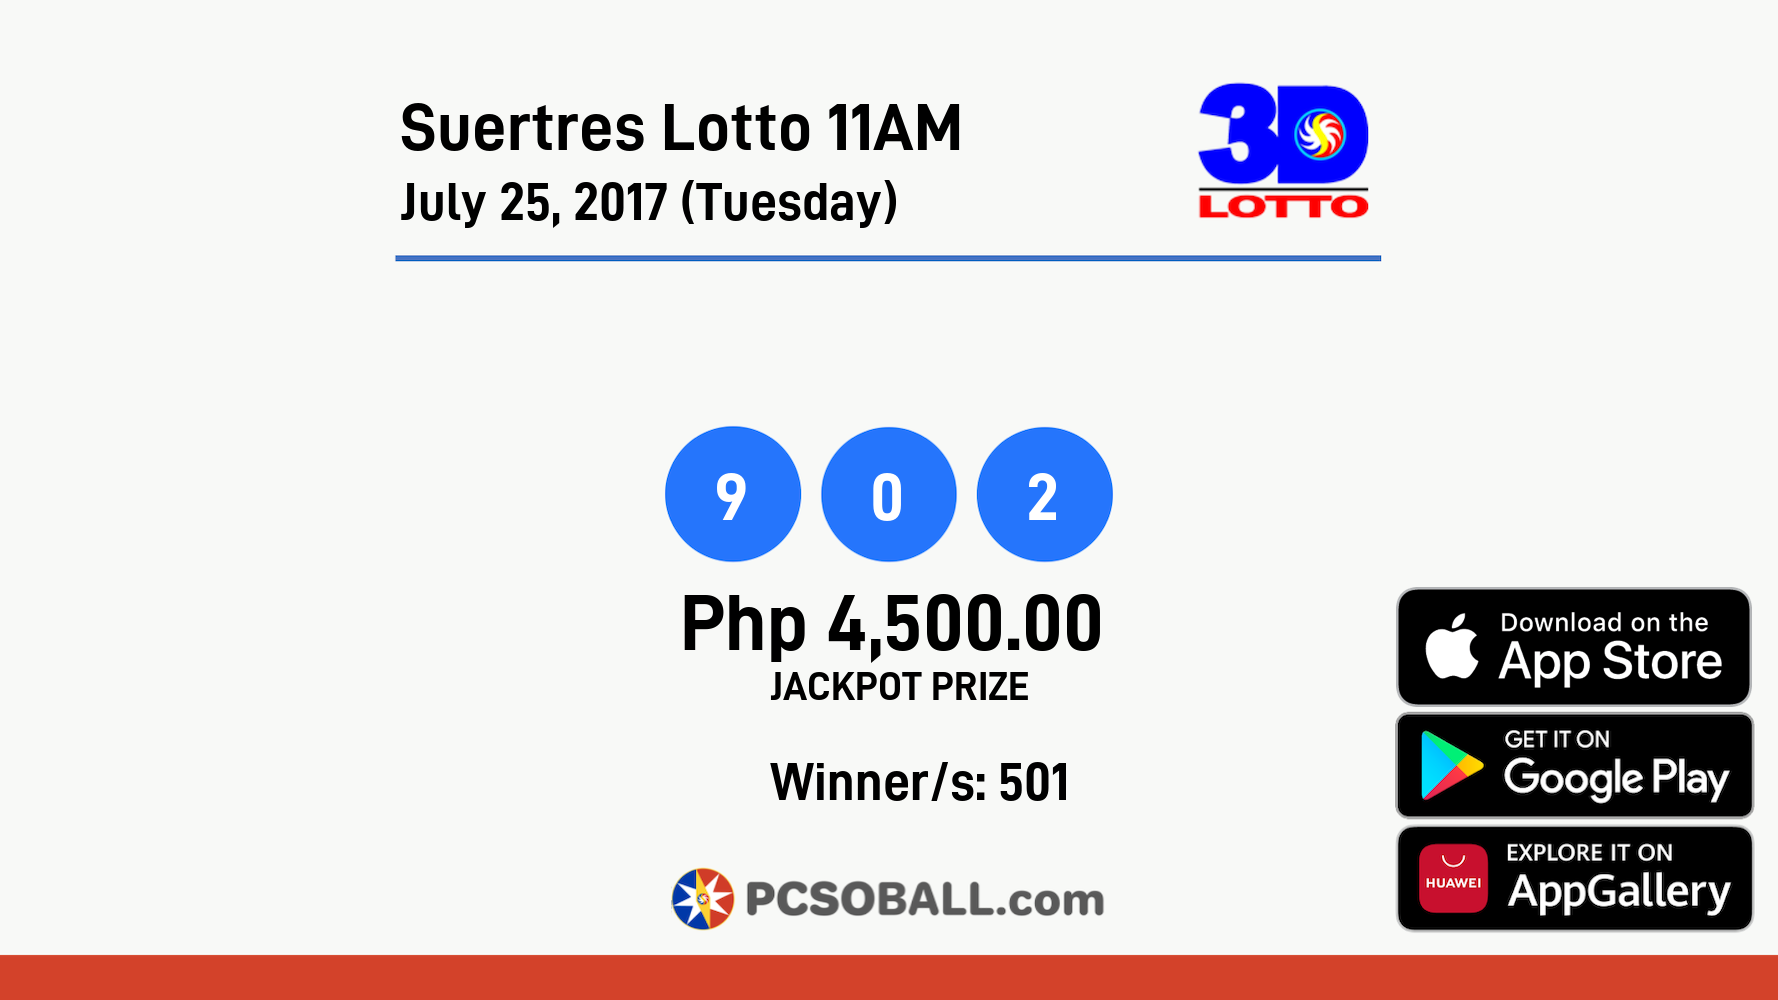 Suertres Lotto 11AM July 25, 2017 (Tuesday) Result